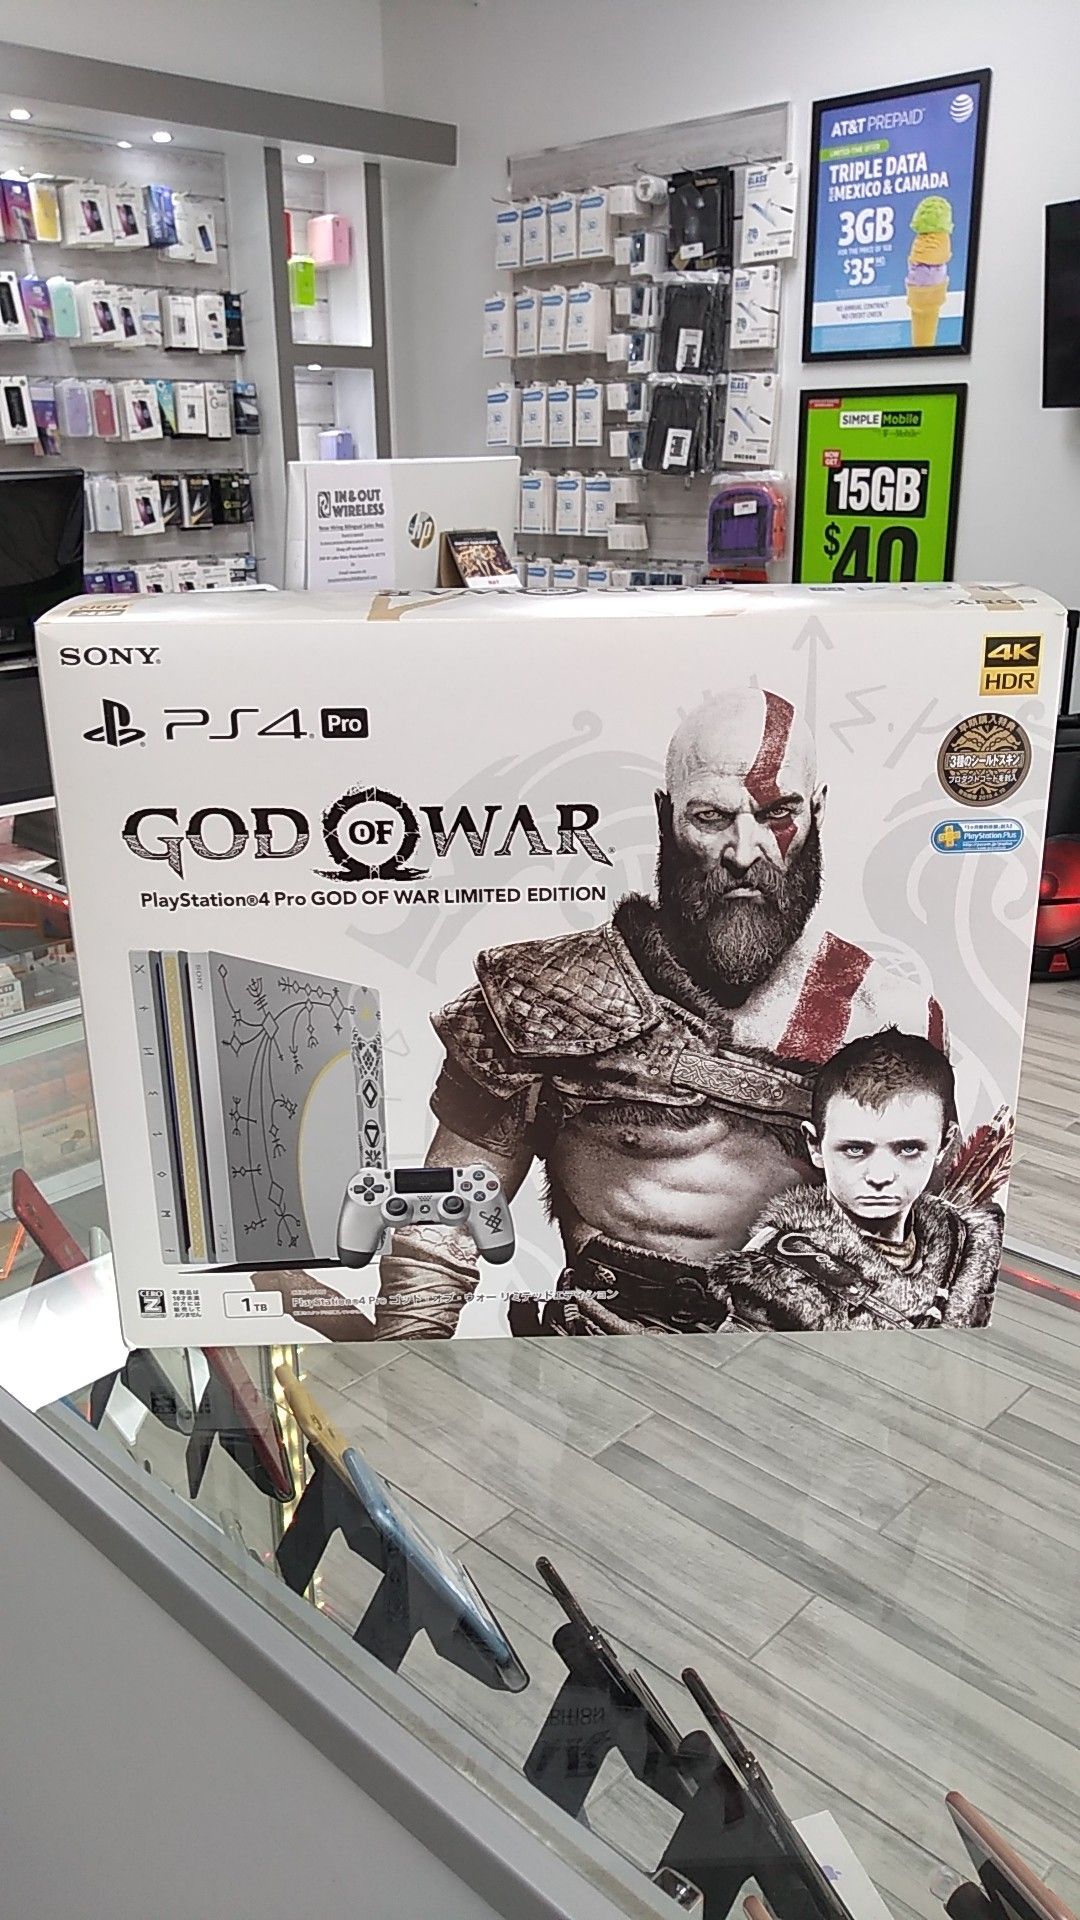 PS4 Pro God of war Limited edition